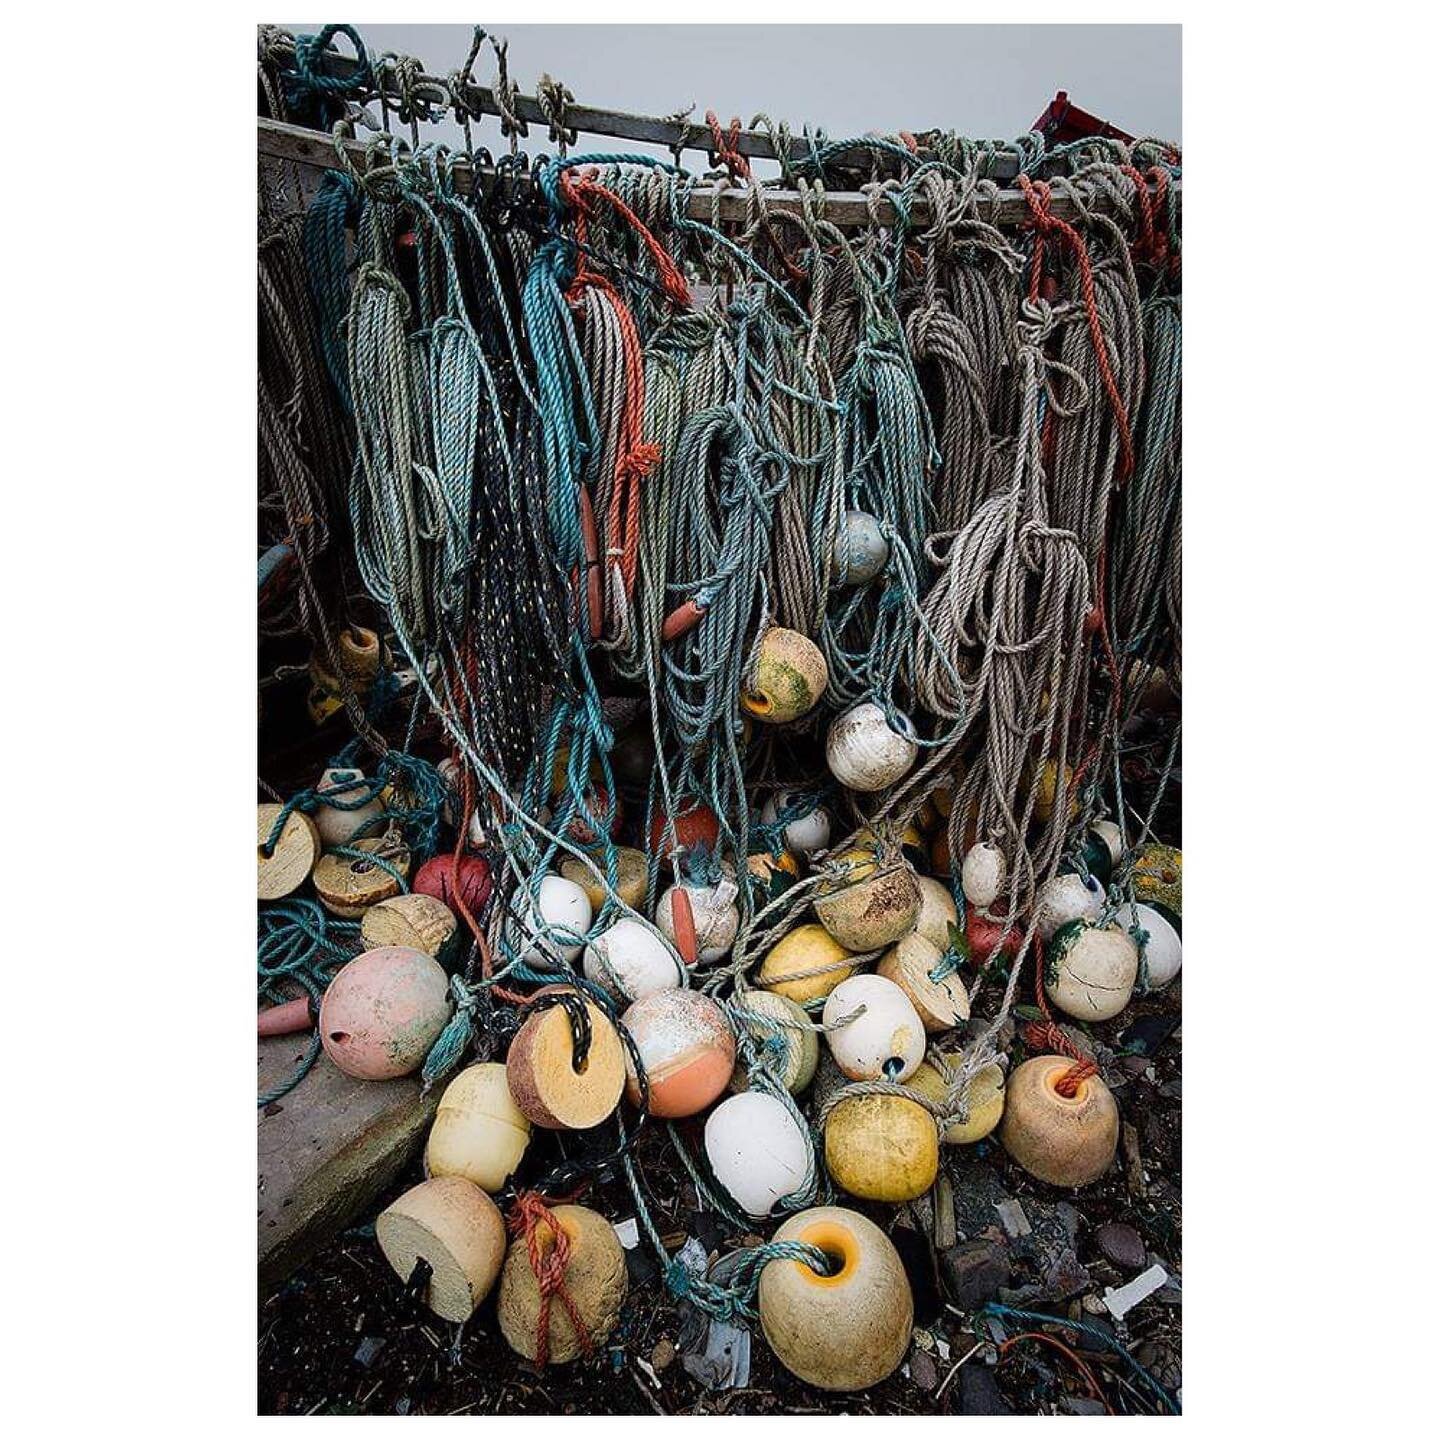 Cove Bay - lines and floats - signs of fishing activity #colour #beachlife #life #winter #igers  #simple #aberdeenshire #instagood  #photooftheday #colour  #cold  #scotspirit #igers #details #instadaily #scotland #winterwalks #covebay #beachisbest #m